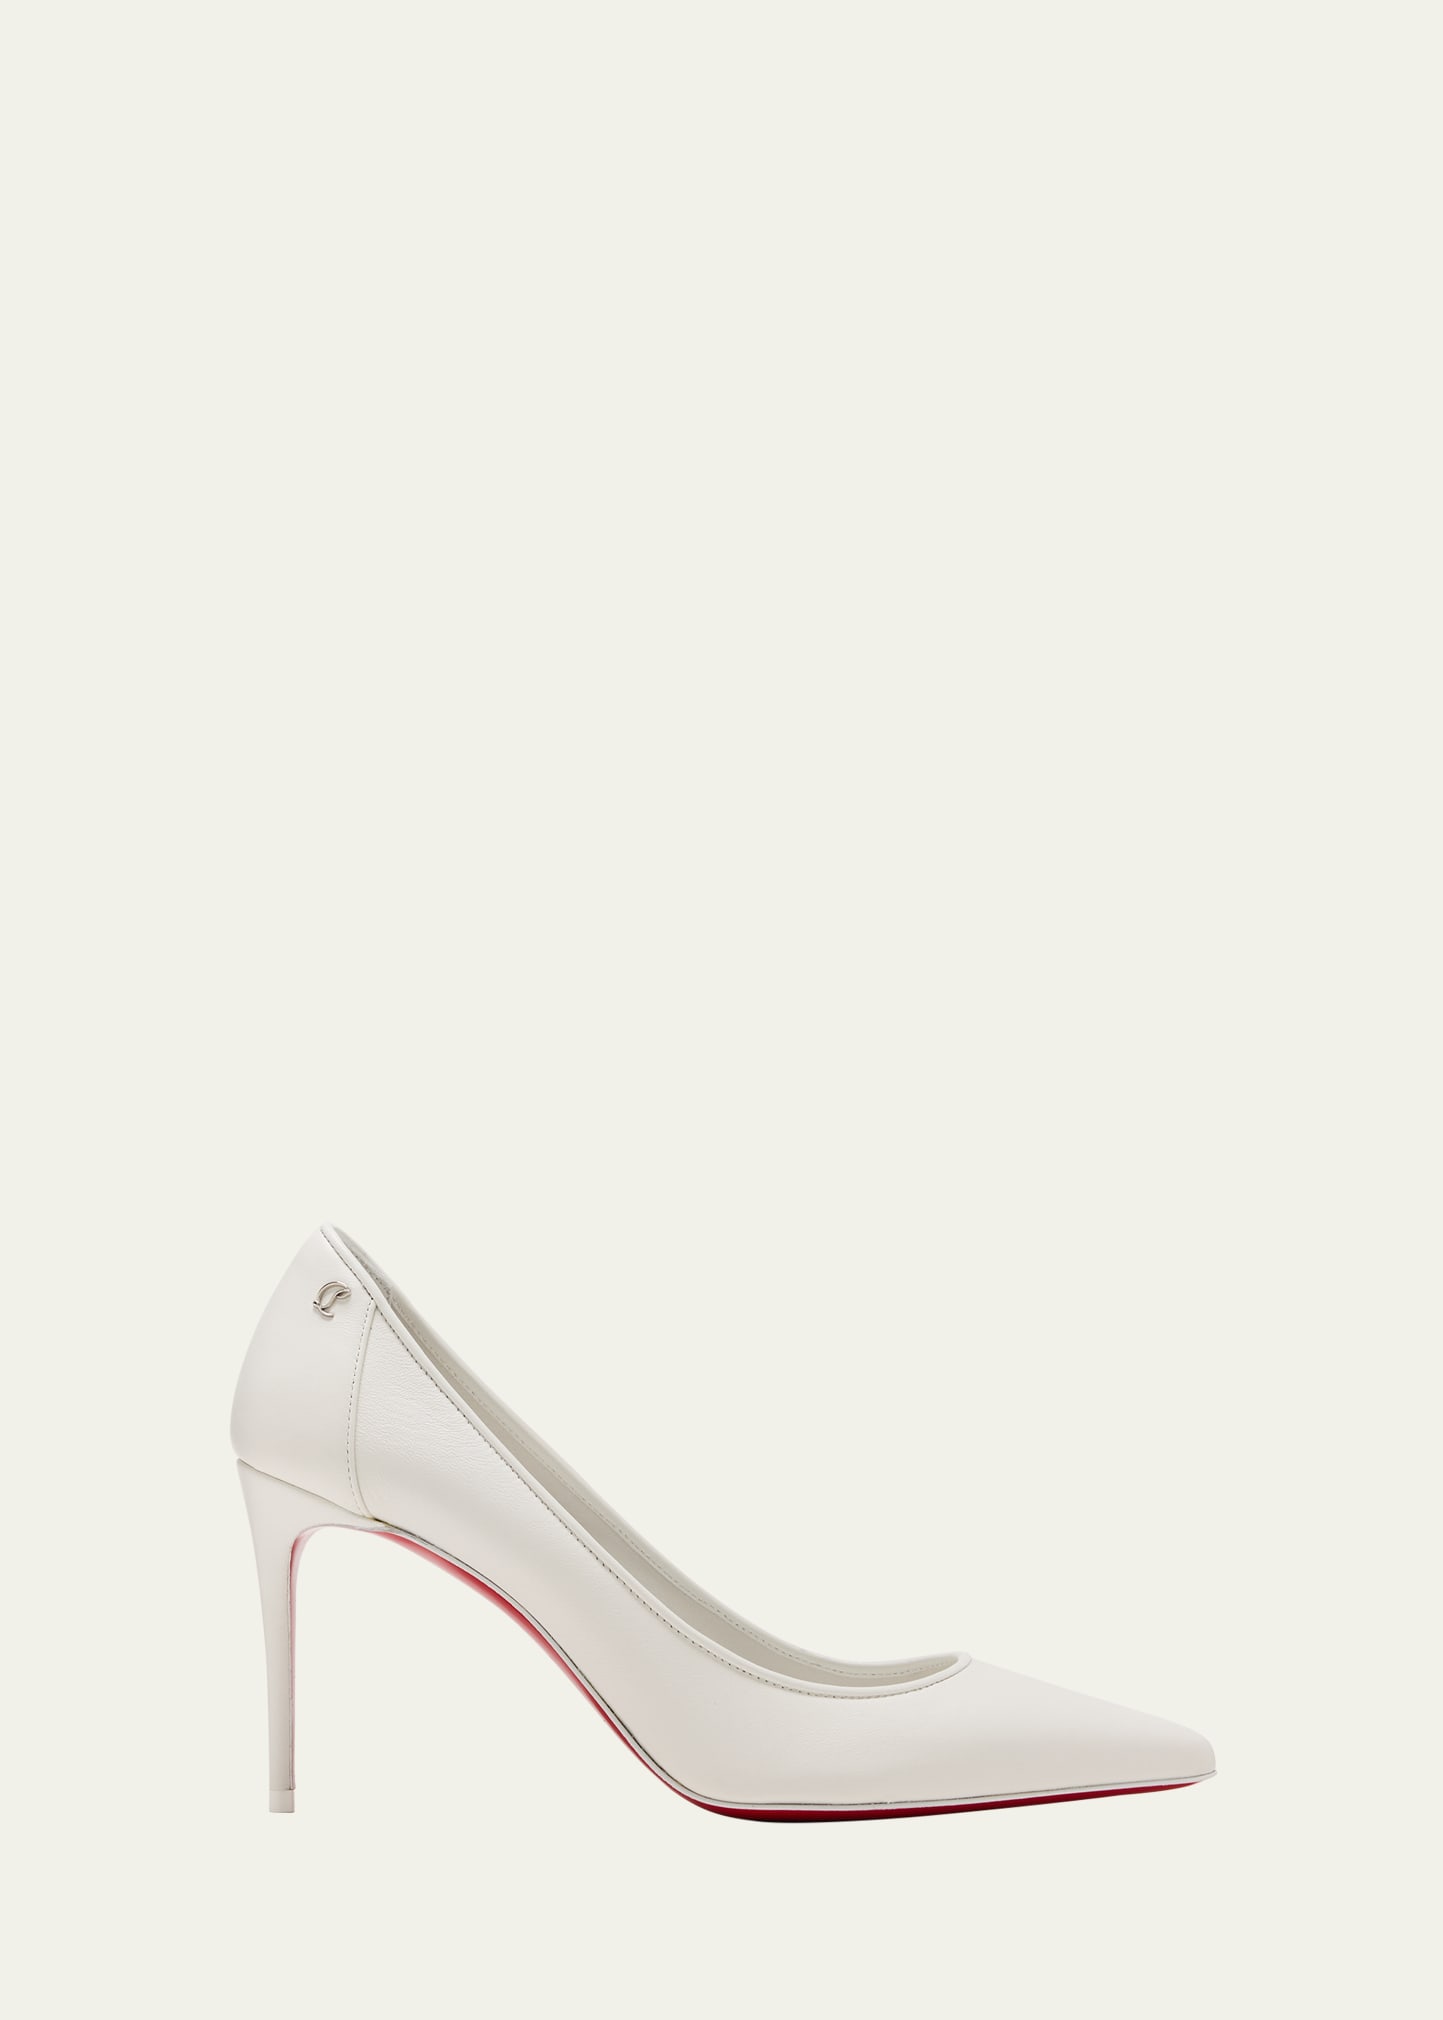 Shop Christian Louboutin Sporty Kate Napa Red Sole Pumps In White